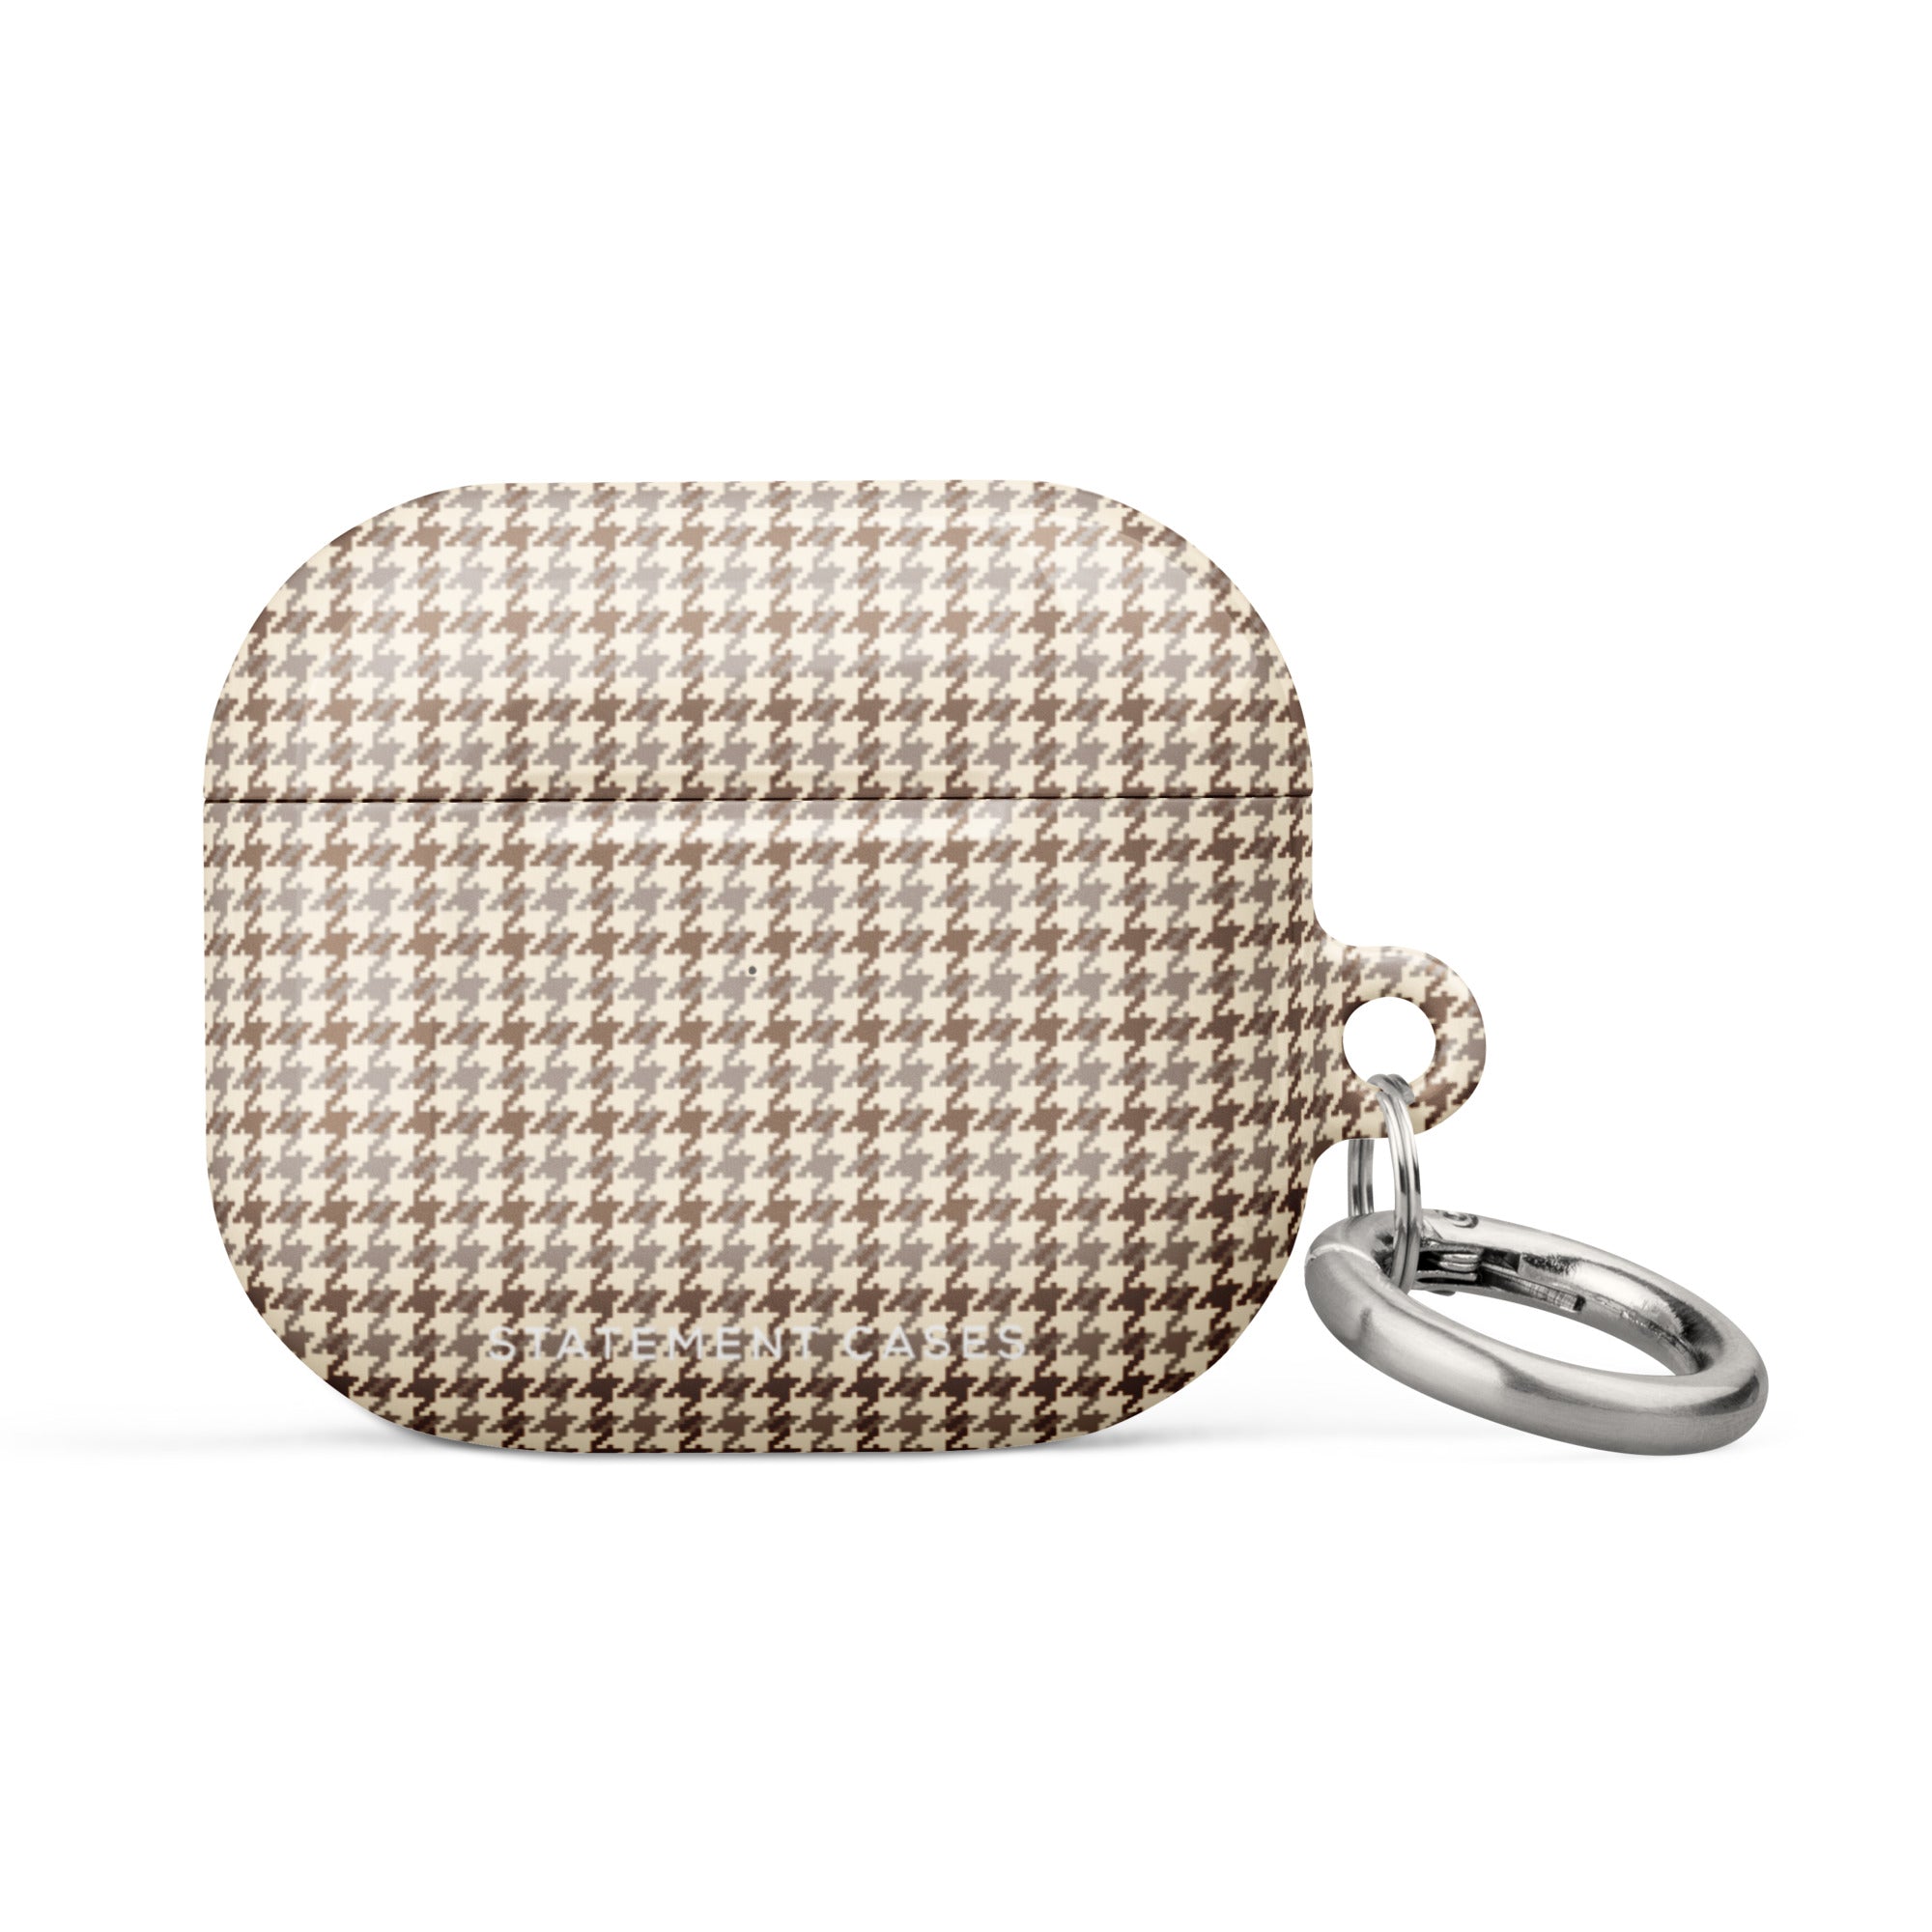 This Classic Houndstooth for AirPods Gen 3 case by Statement Cases, meticulously crafted with a beige and brown houndstooth pattern, is attached to a sturdy metal carabiner for easy access. Featuring a compact, rectangular design with rounded edges and premium impact-absorbing material, it ensures both style and utmost protection.